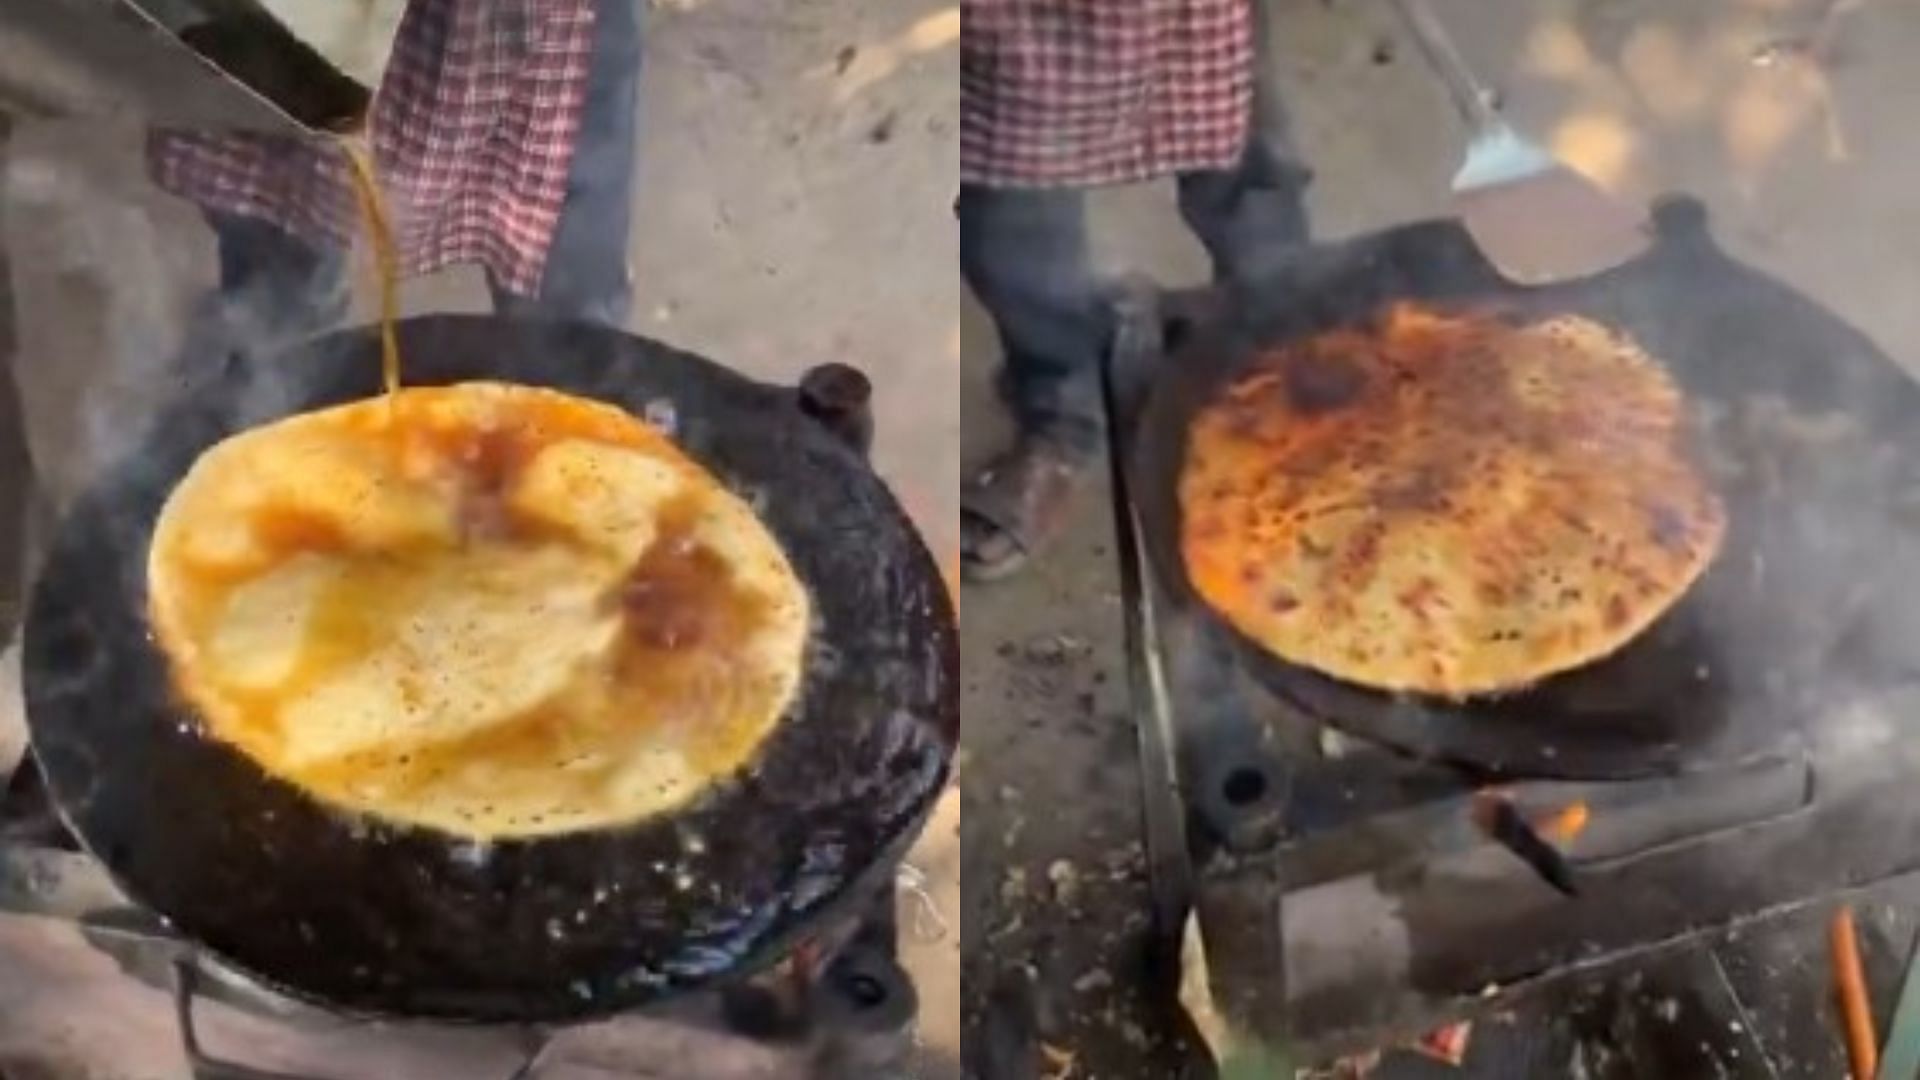 chandigarh dhaba under scrutiny after video of diesel paratha goes viral on social media